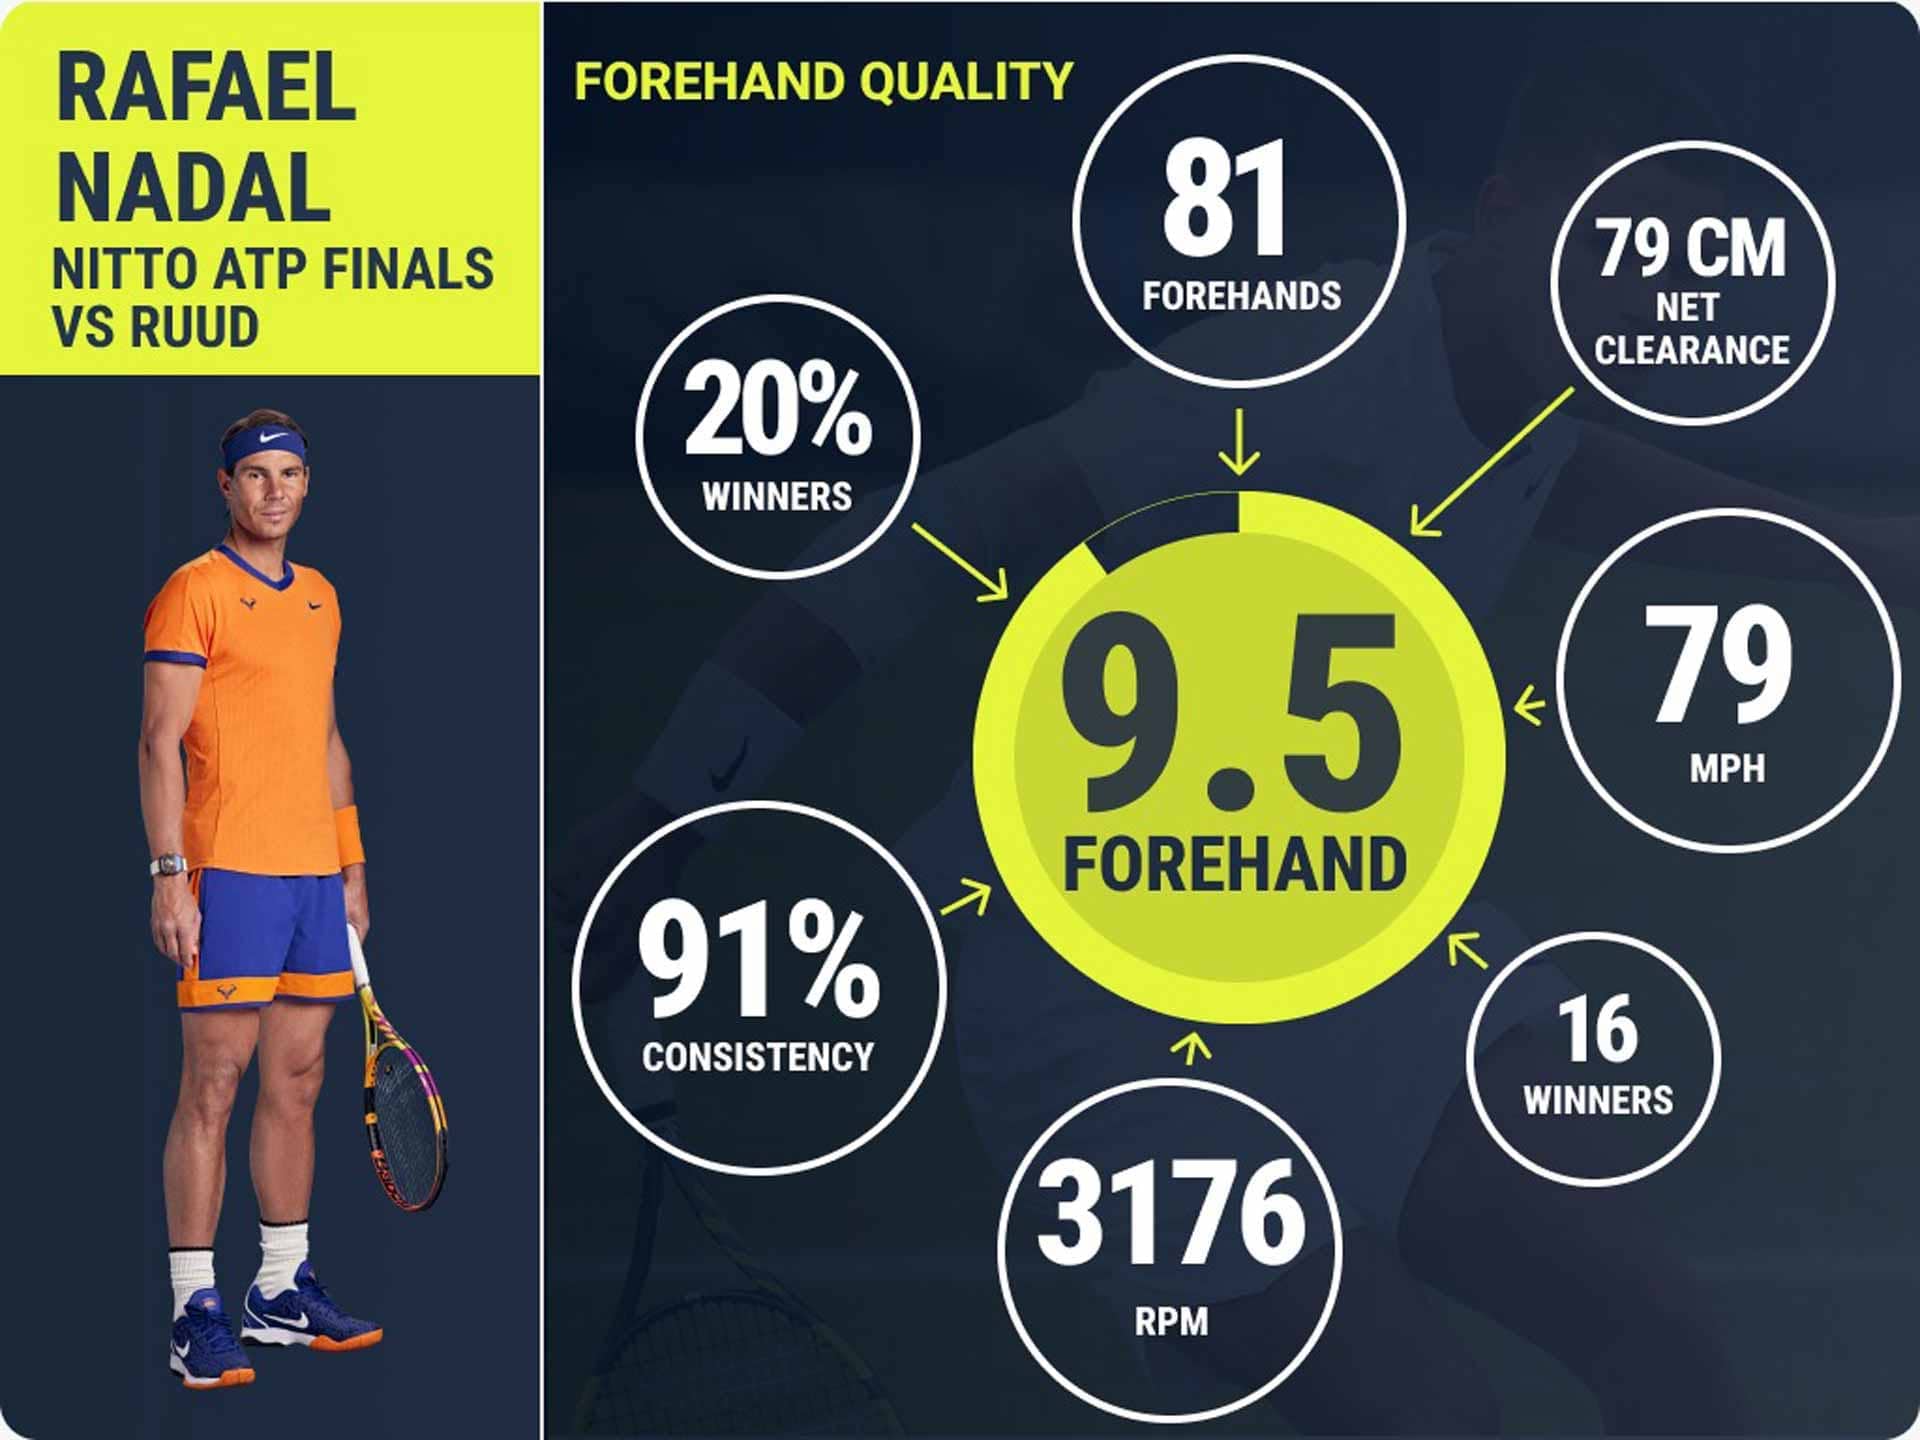 <a href='https://www.atptour.com/en/players/rafael-nadal/n409/overview'>Rafael Nadal</a> INSIGHTS Forehand Quality